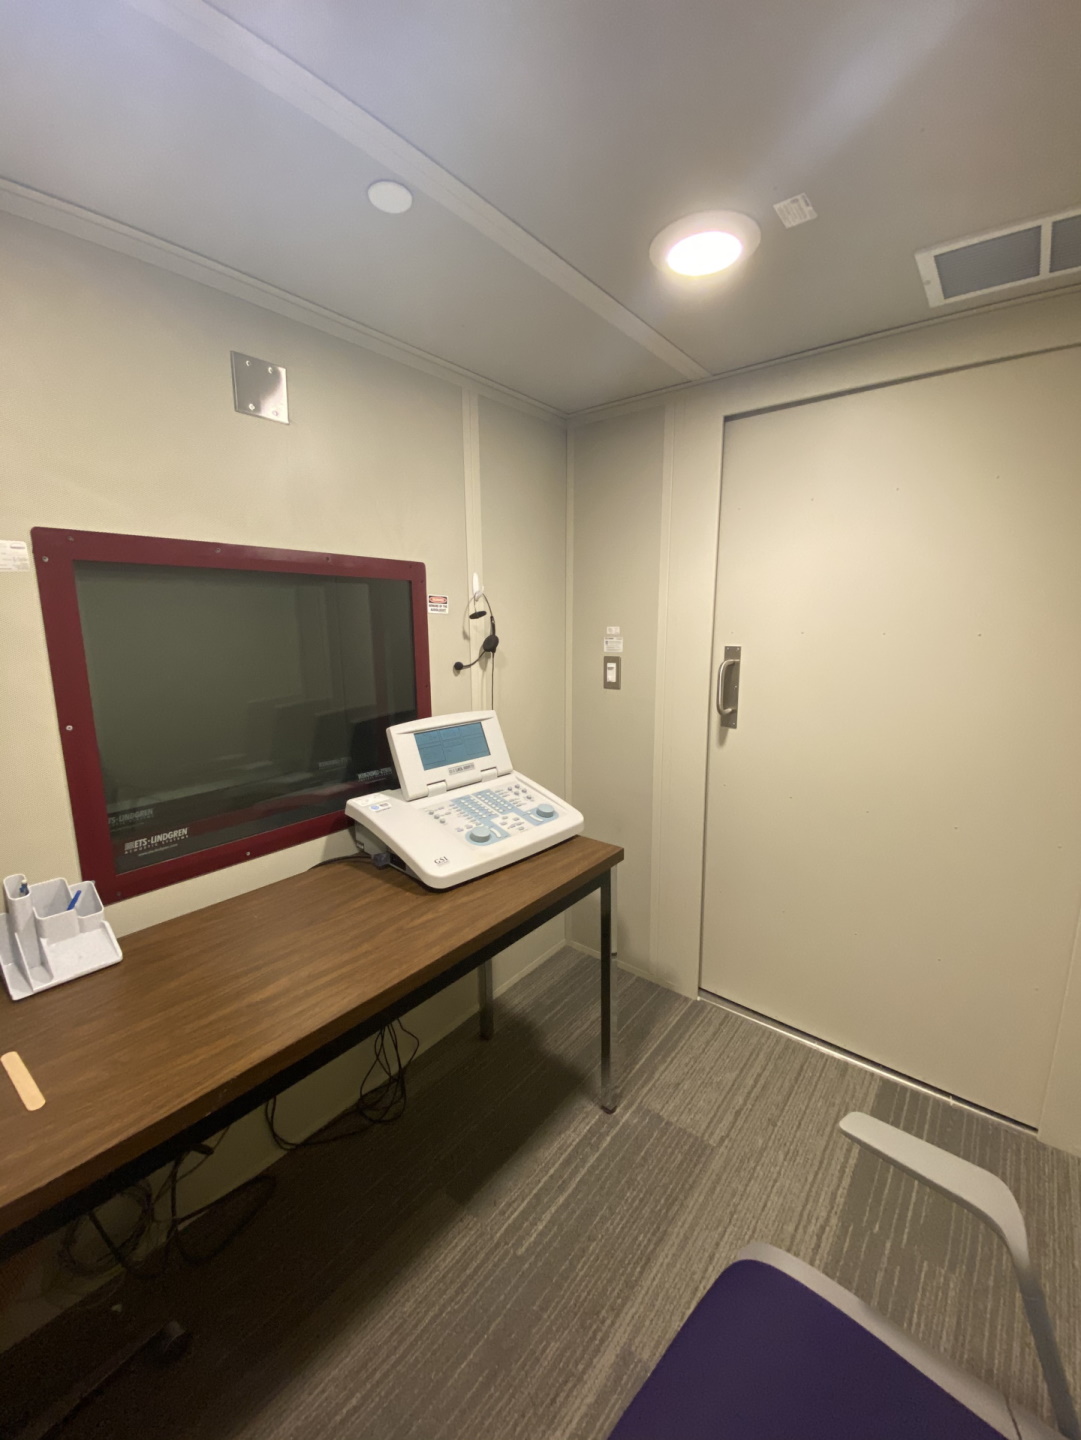 Audiology Booth